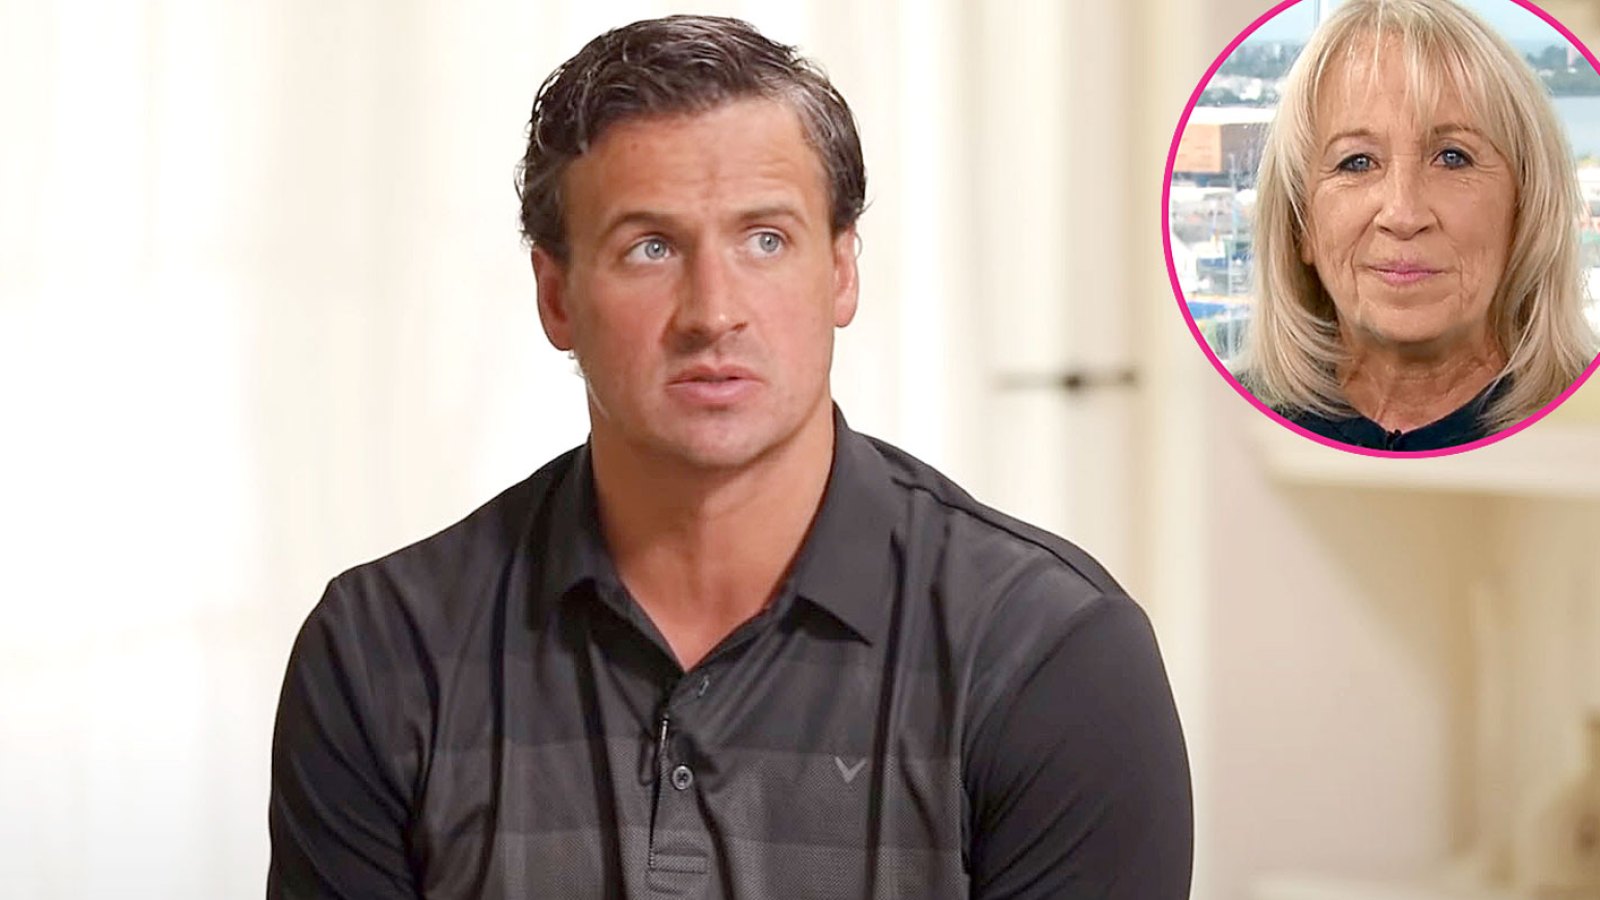 Ryan Lochte Reveals Hes Been Estranged From His Mom Years